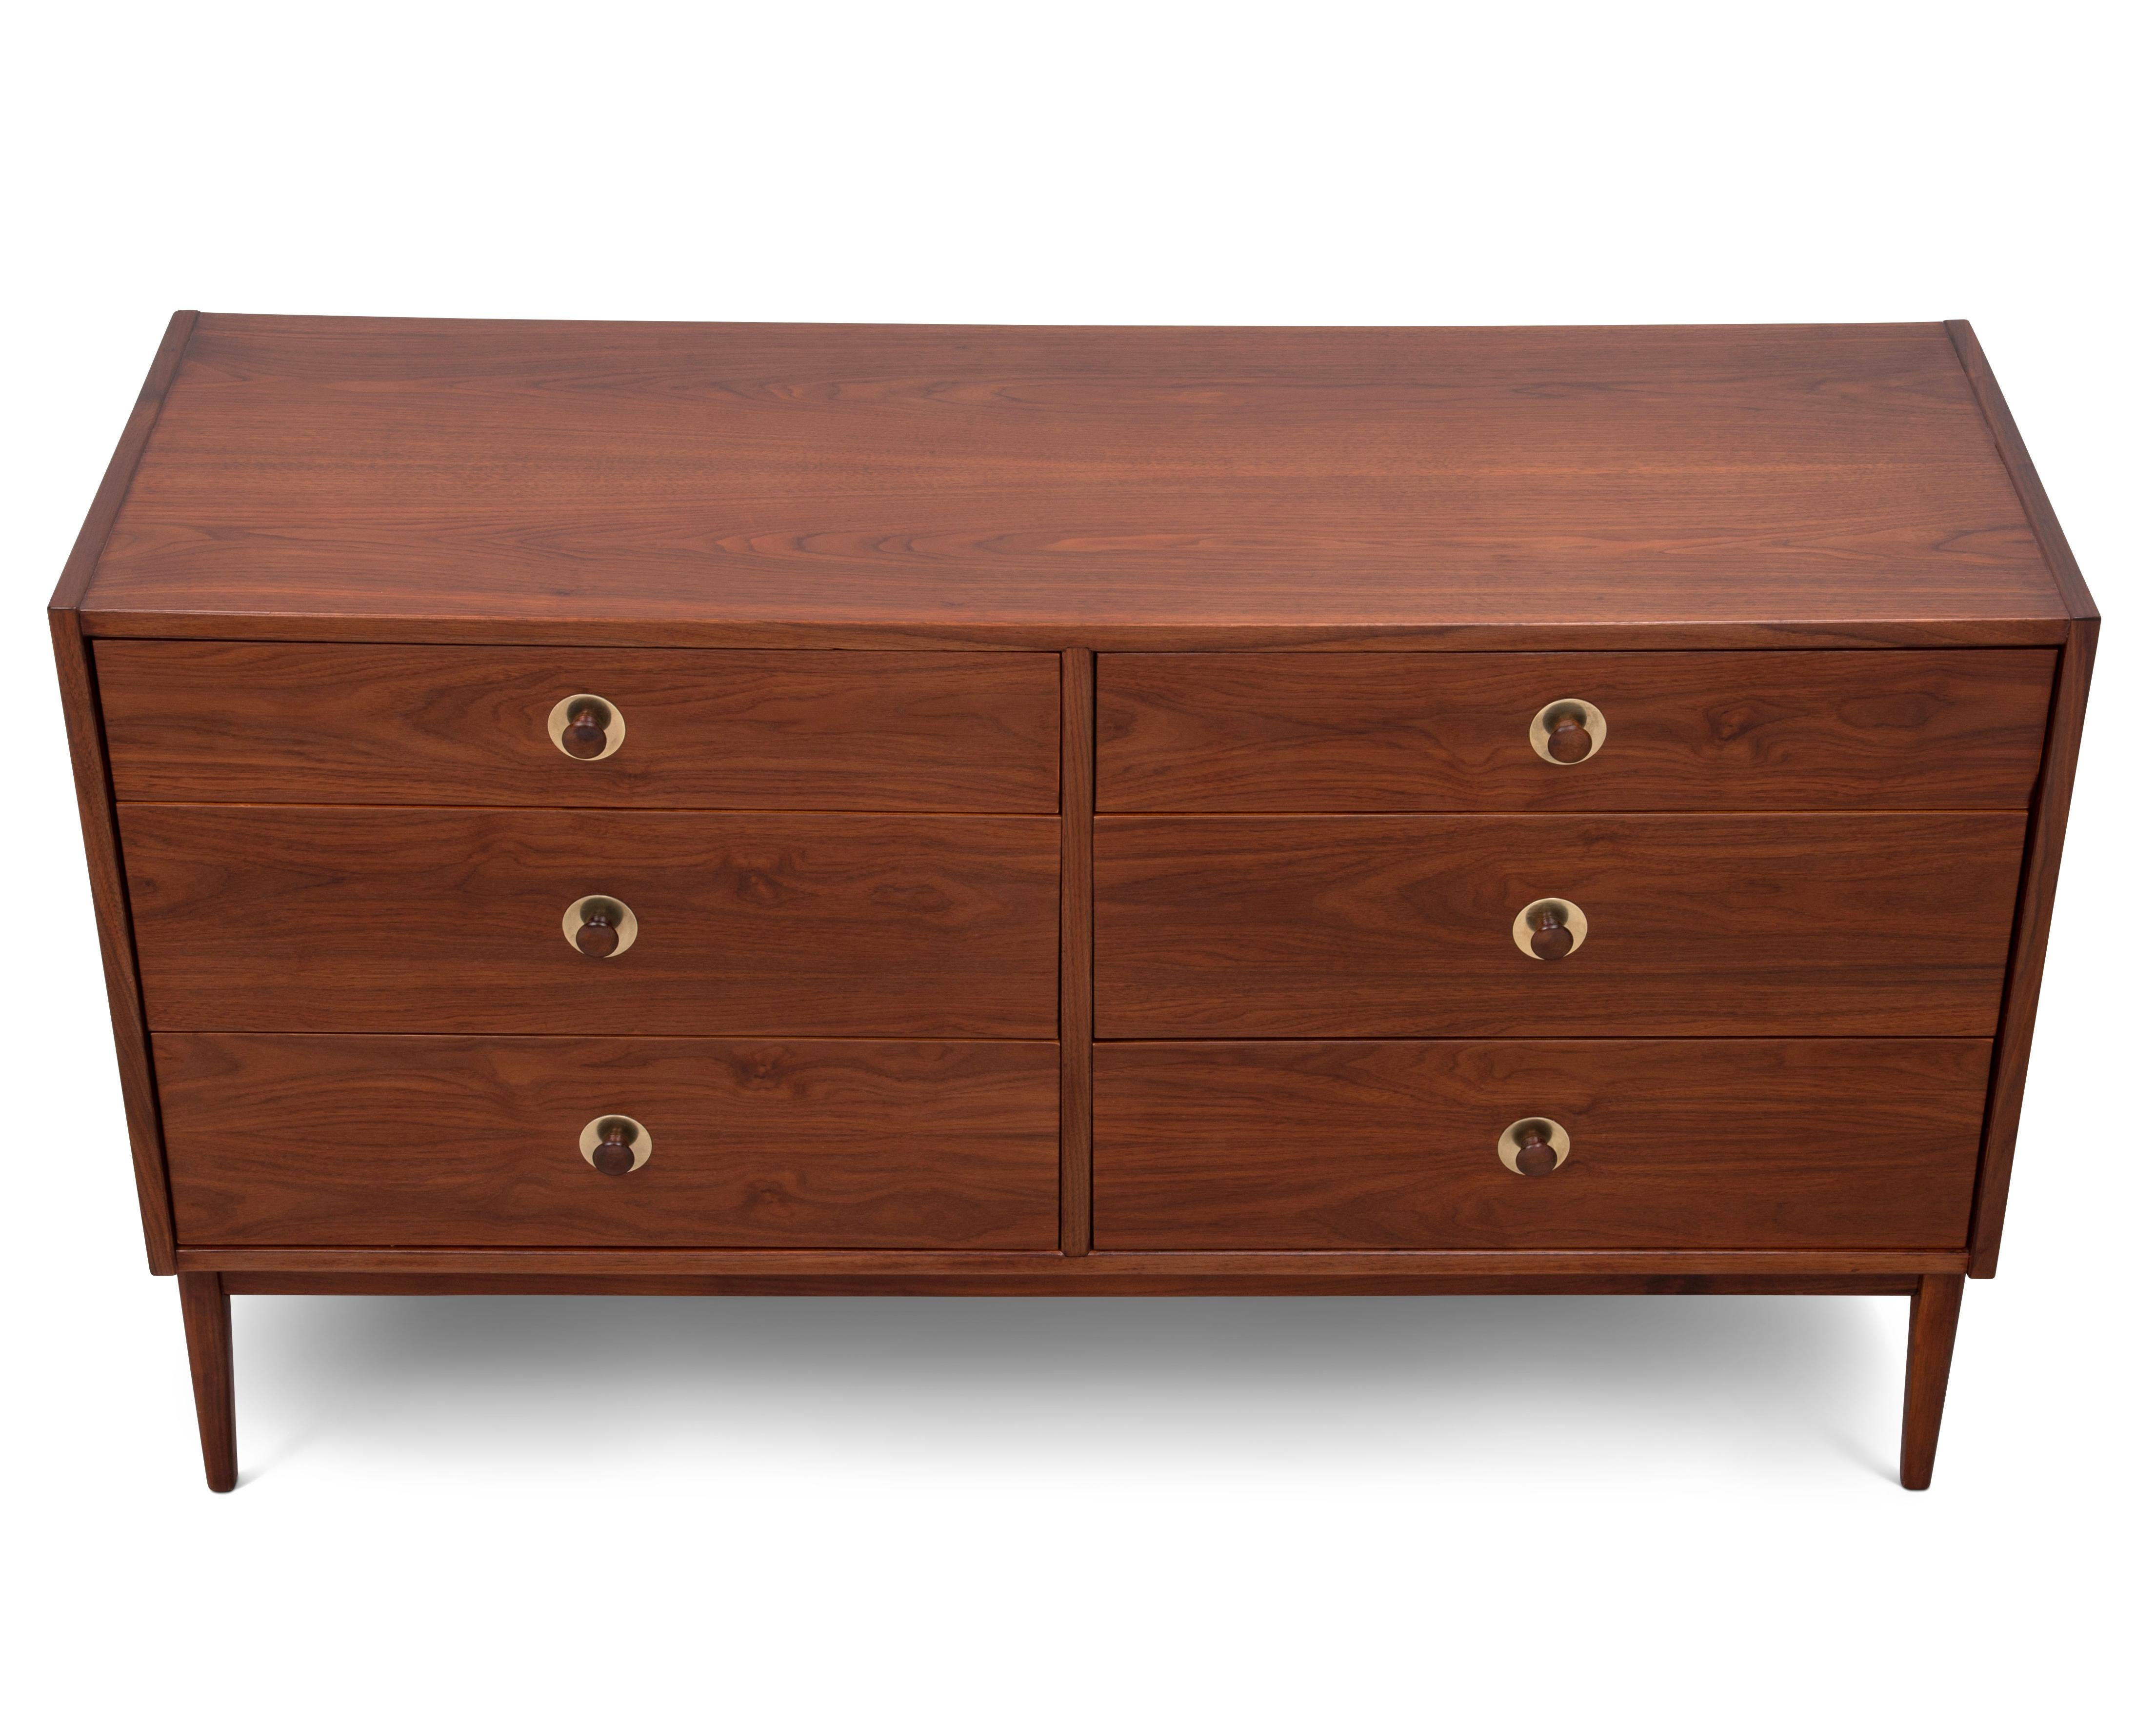 Jack Cartwright Founders Furniture Walnut Brass Mid-Century Modern Dresser In Good Condition For Sale In Forest Grove, PA